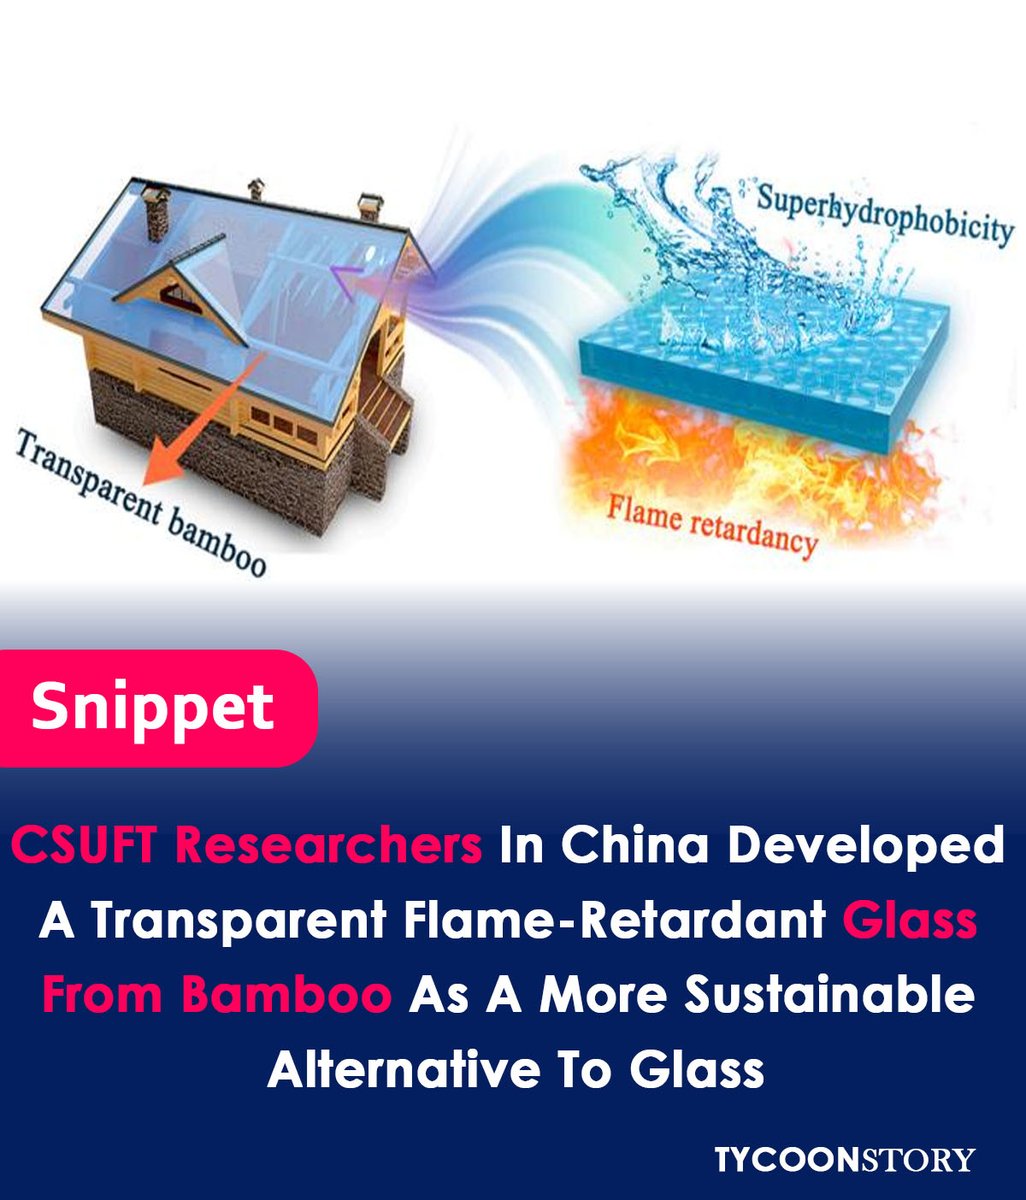 Transparent material from bamboo developed by Chinese researchers
#SustainableGlass #Bamboo #Innovation #FireResistant #Material #GreenTechnology #EcoFriendly #Building #RenewableEnergy #PerovskiteSolarCells #MaterialScience #InnovationForGood #trasparent
tycoonstory.com